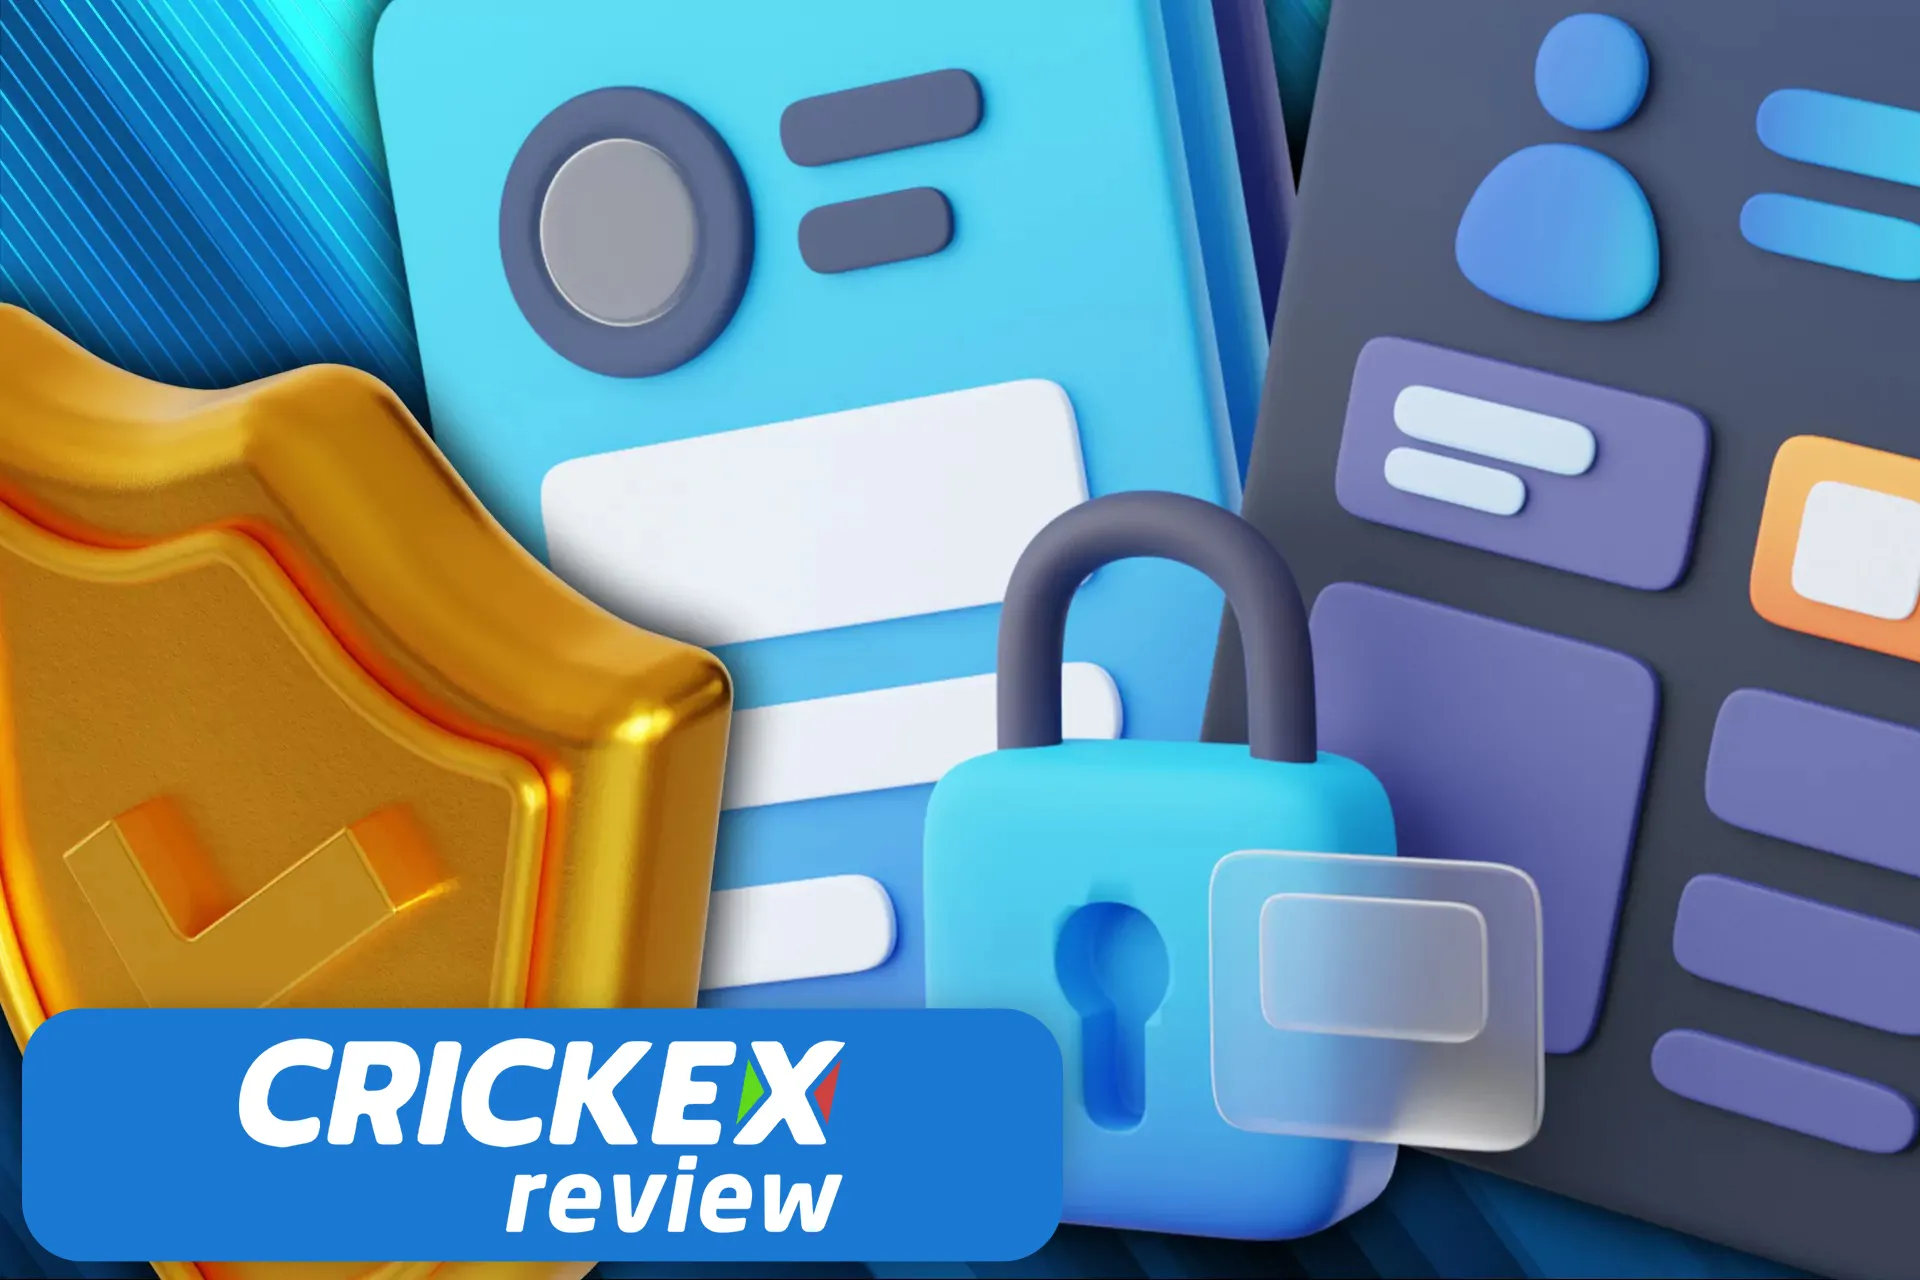 Crickex strongly protects personal information of its users.